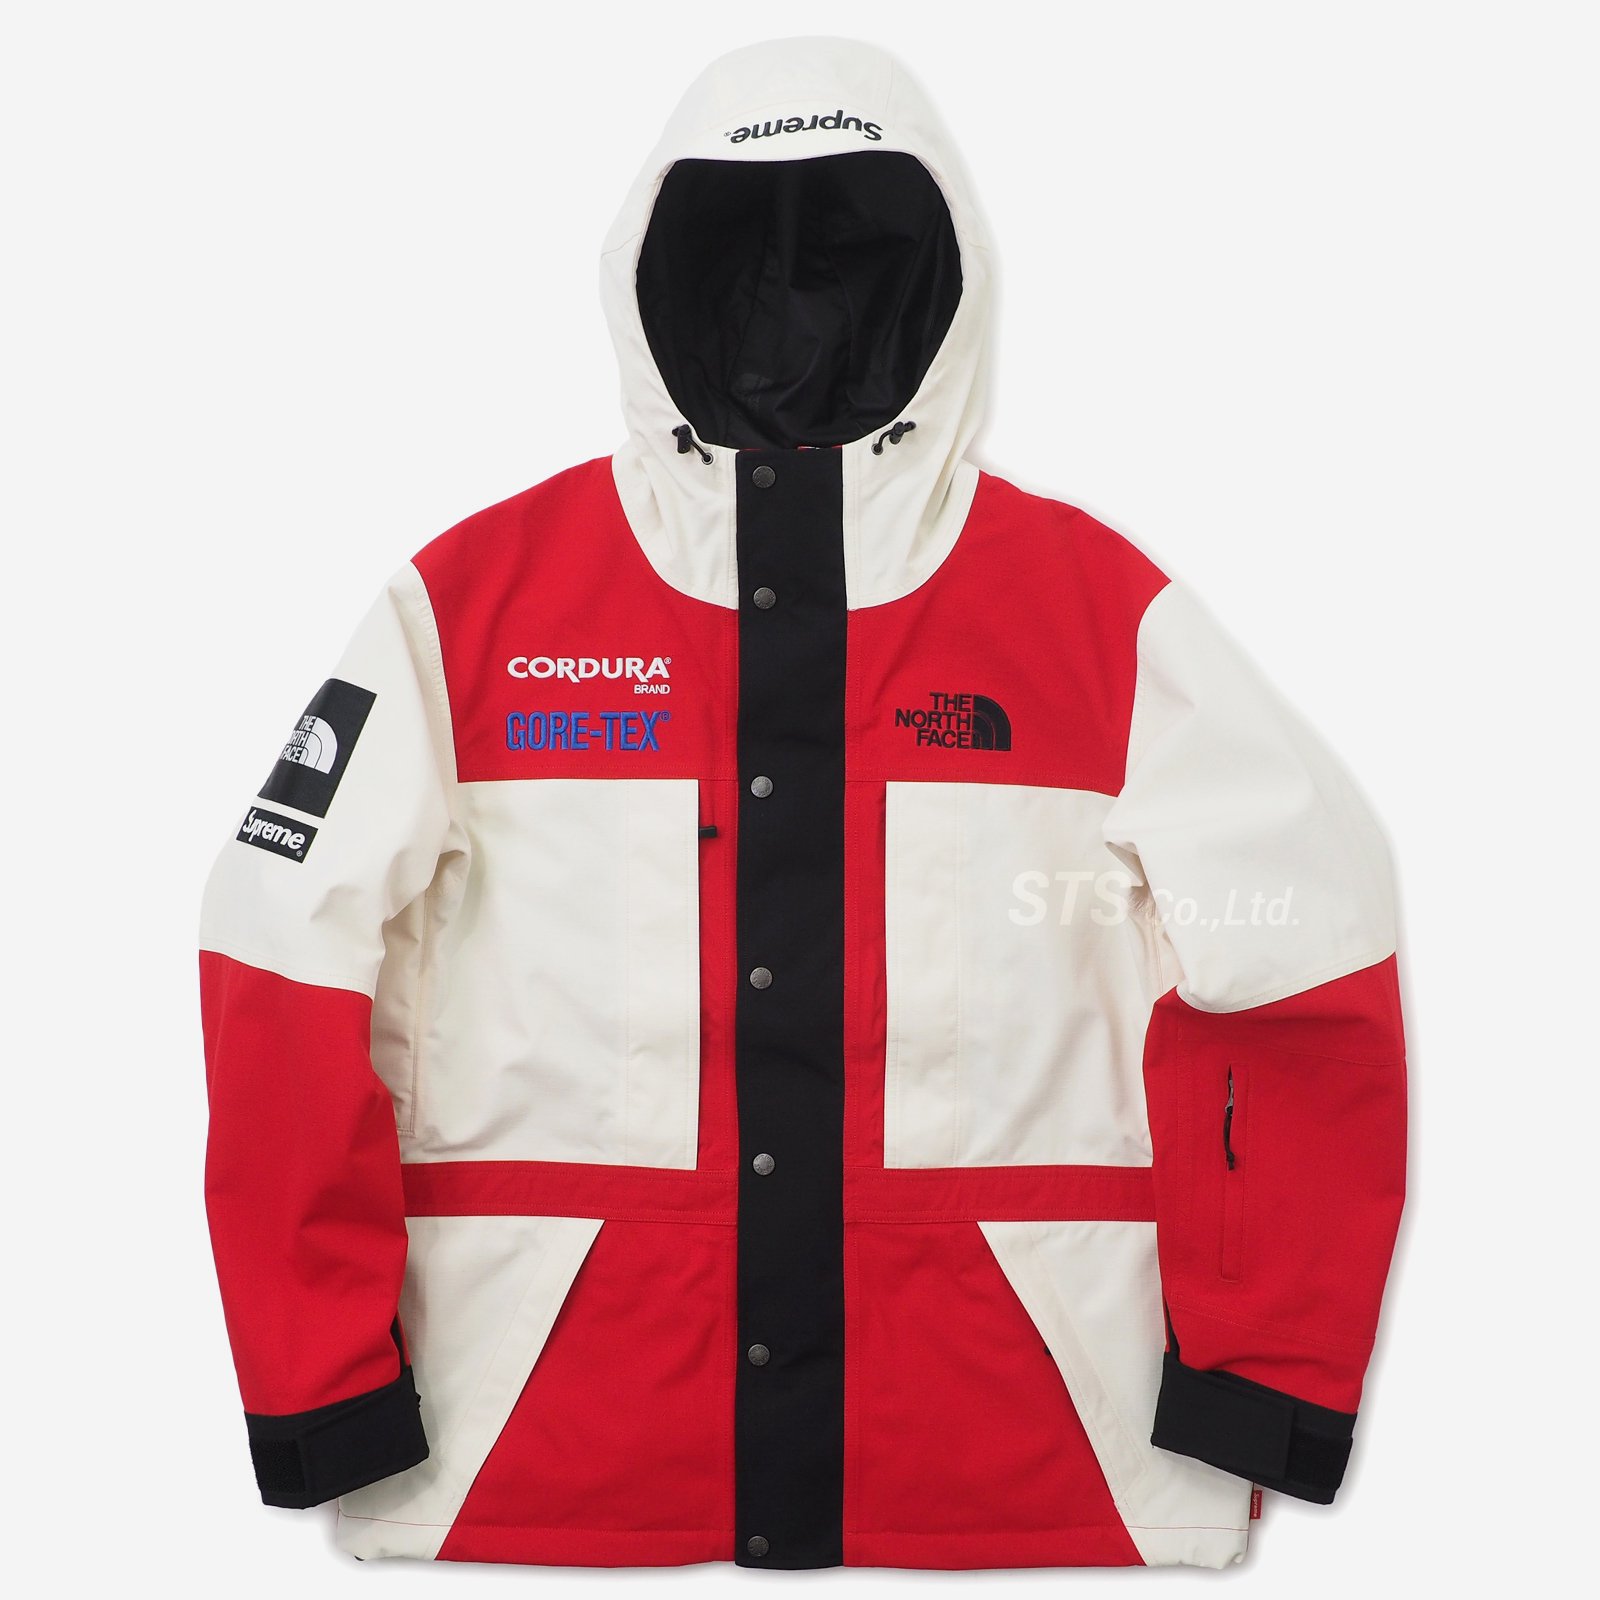 Supreme/The North Face Expedition Jacket - ParkSIDER